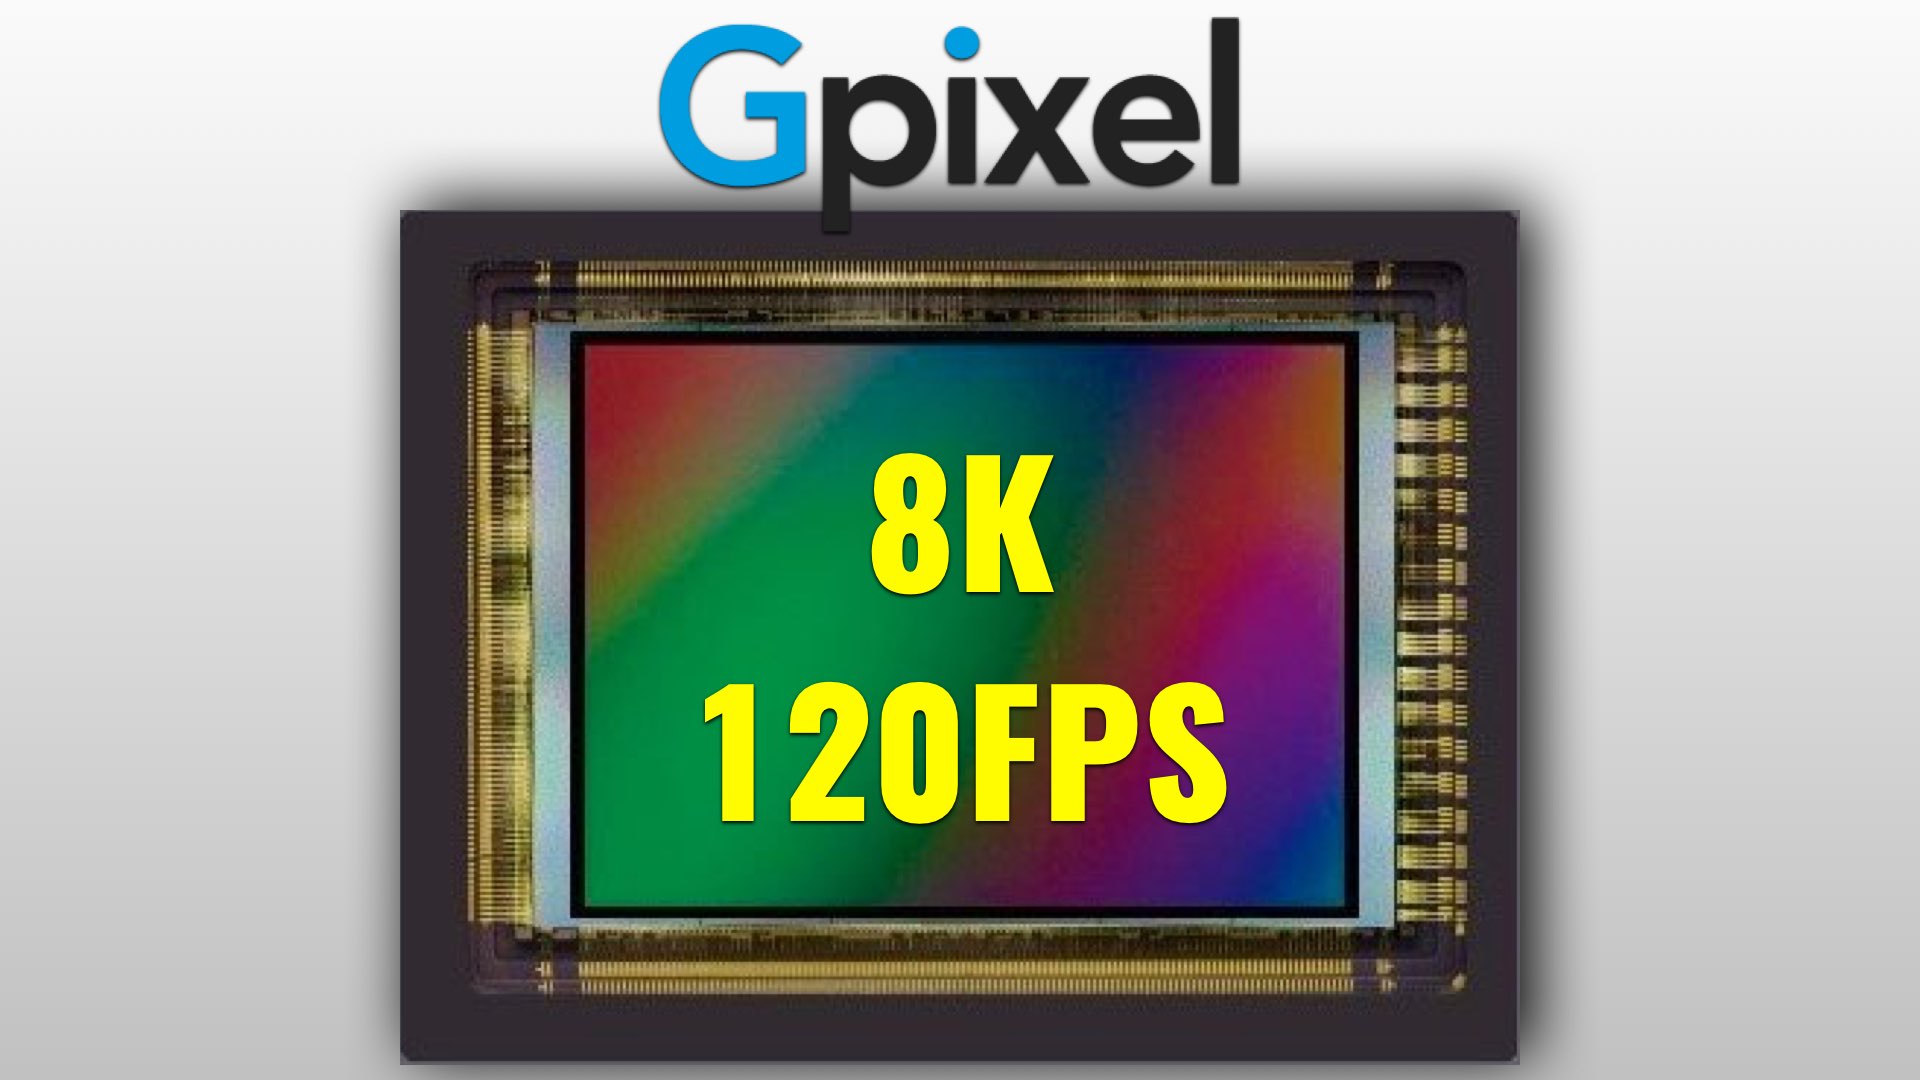 Gpixel Announces a new 8K 120FPS BSI Stacked Sensor For Cinematography Applications